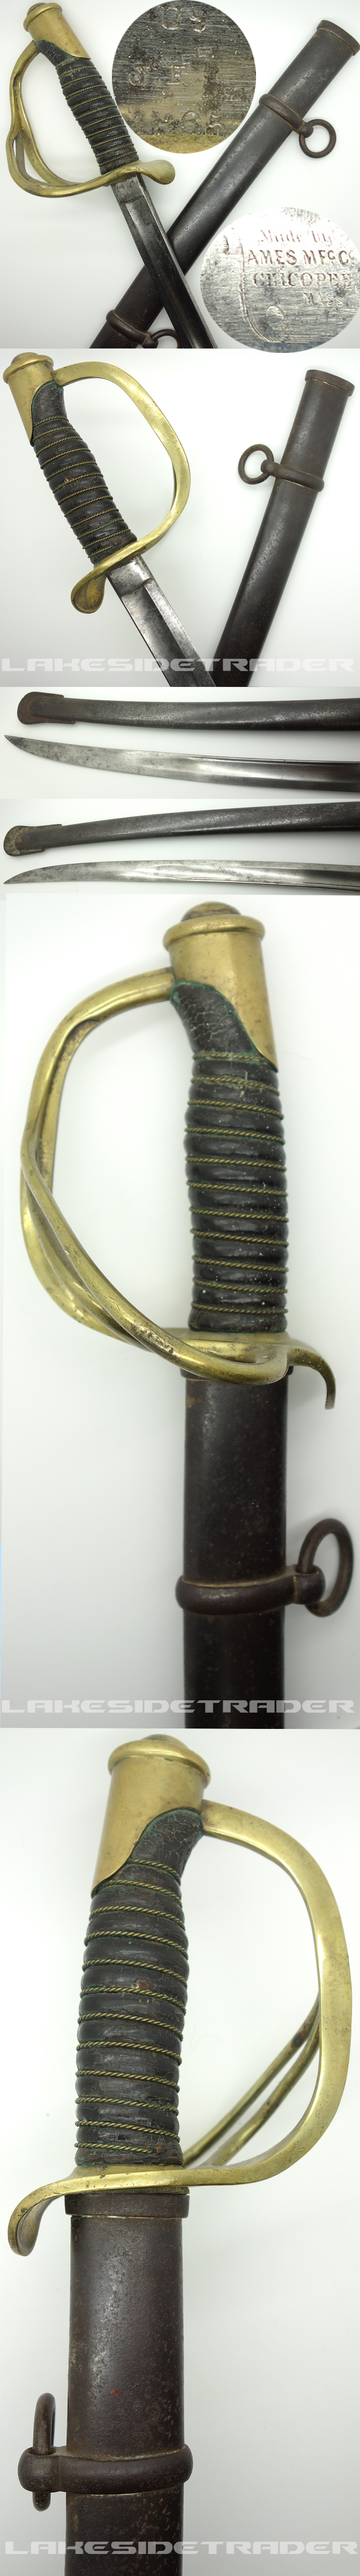 US Model 1860 Heavy Cavalry Saber by Ames